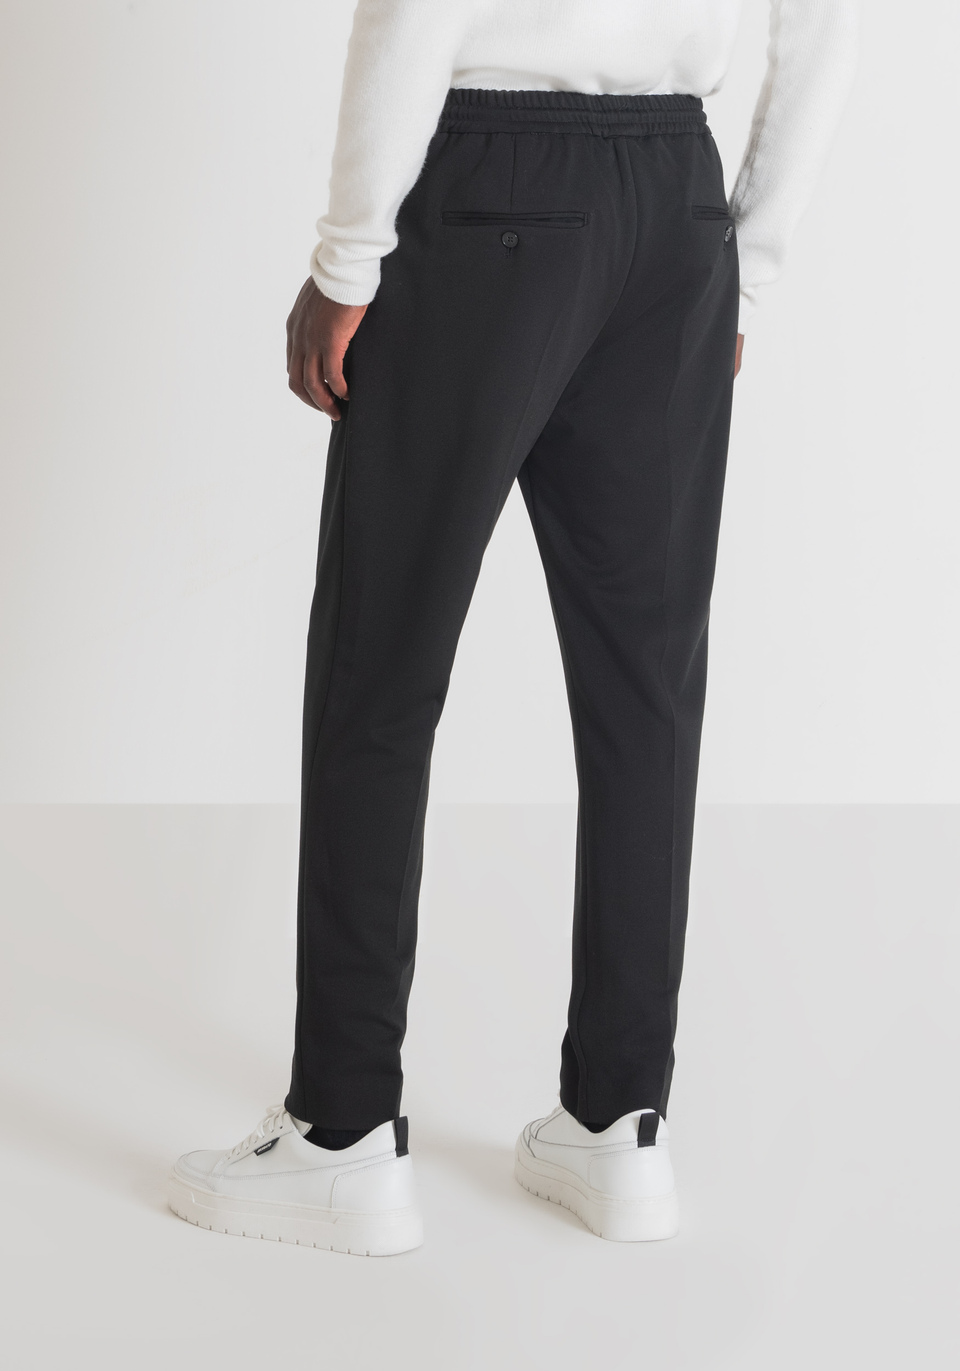 "NEIL" REGULAR-FIT TROUSERS WITH ELASTIC AND DRAWSTRING - Antony Morato Online Shop